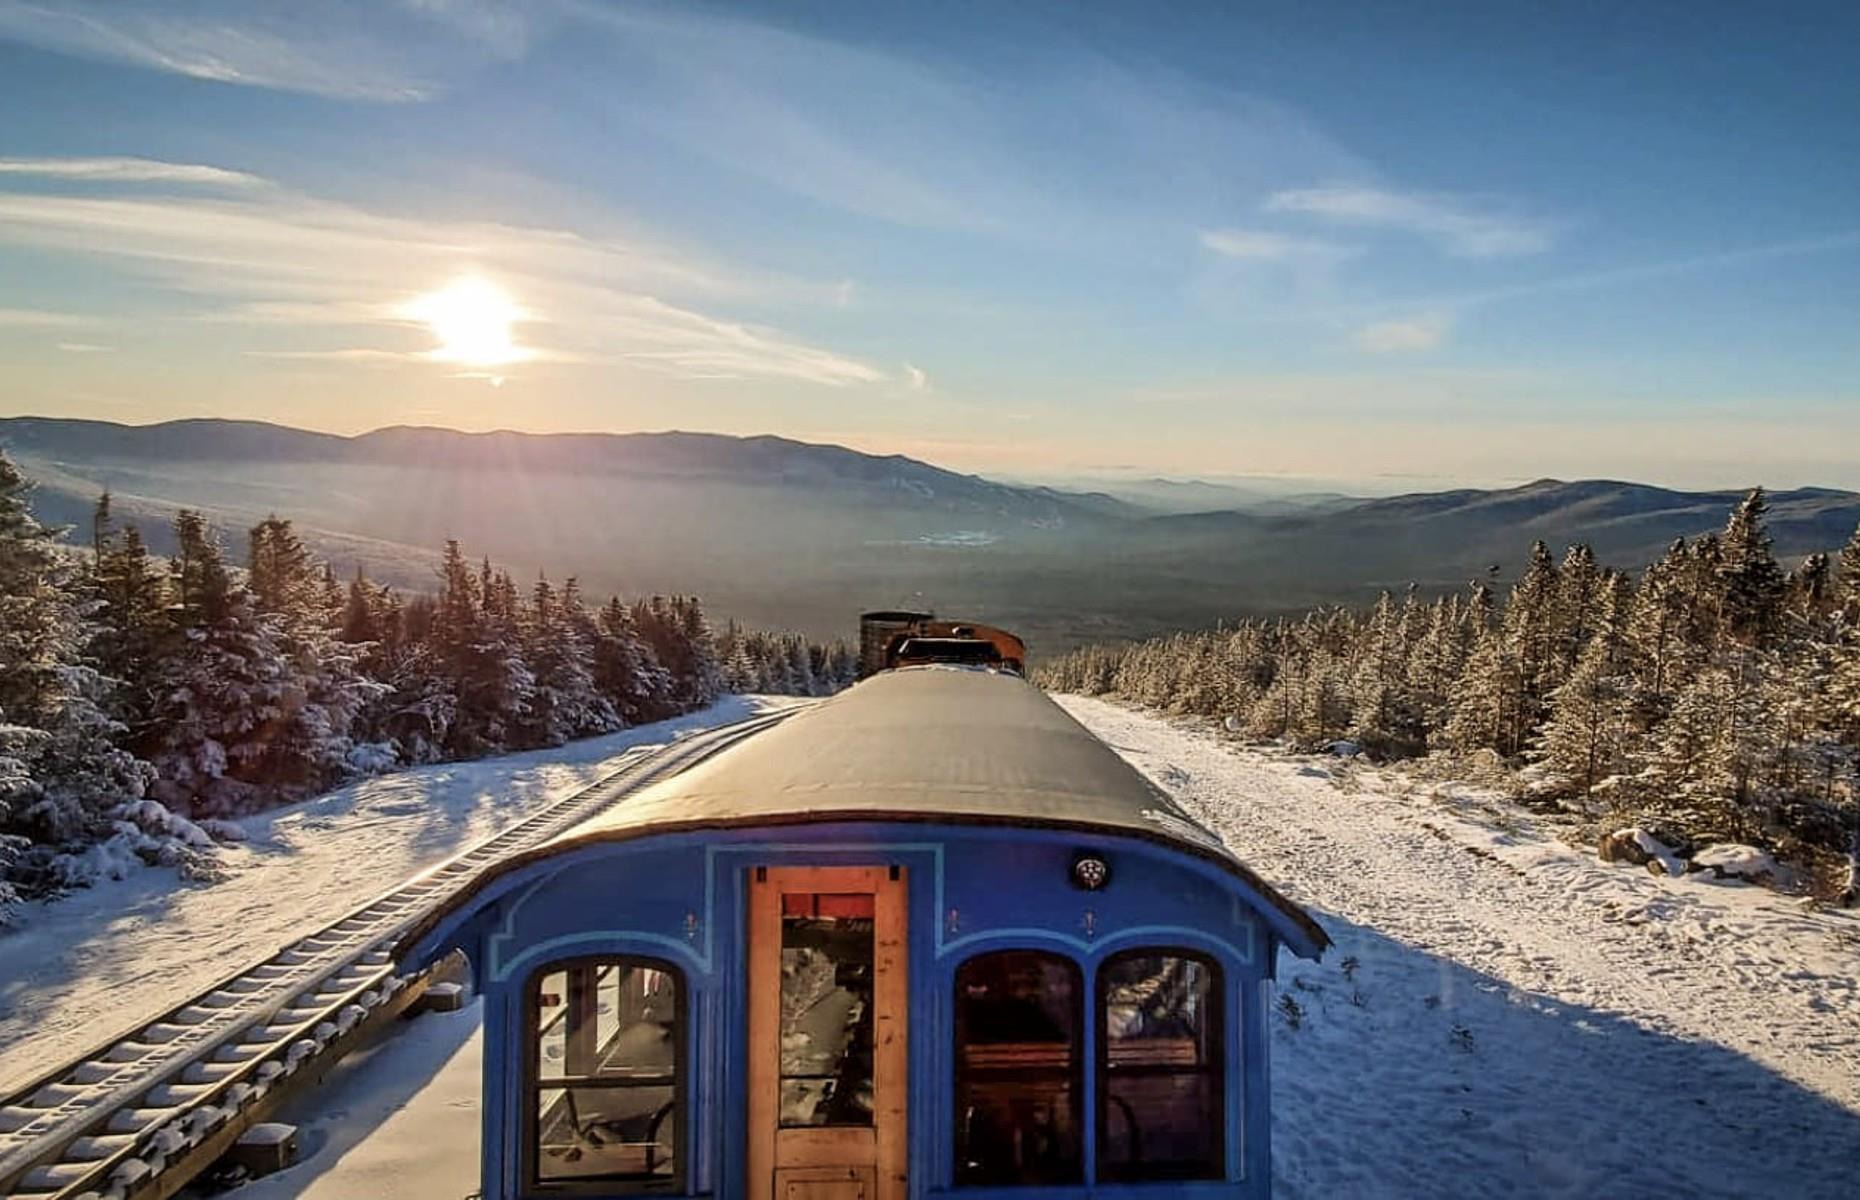 Although it’s only a 3.5-mile (5.6km) journey, the train chugs by at a leisurely pace and plenty of time is allowed for soaking in the 360-degree views at the top, so the round trip takes around three hours. If the weather’s clear, travelers can see five states from this vantage point, as well as Canada and the Atlantic Ocean. Tickets start at around $99 per person, with two daily departures at 8.30am and 3pm from May to October.